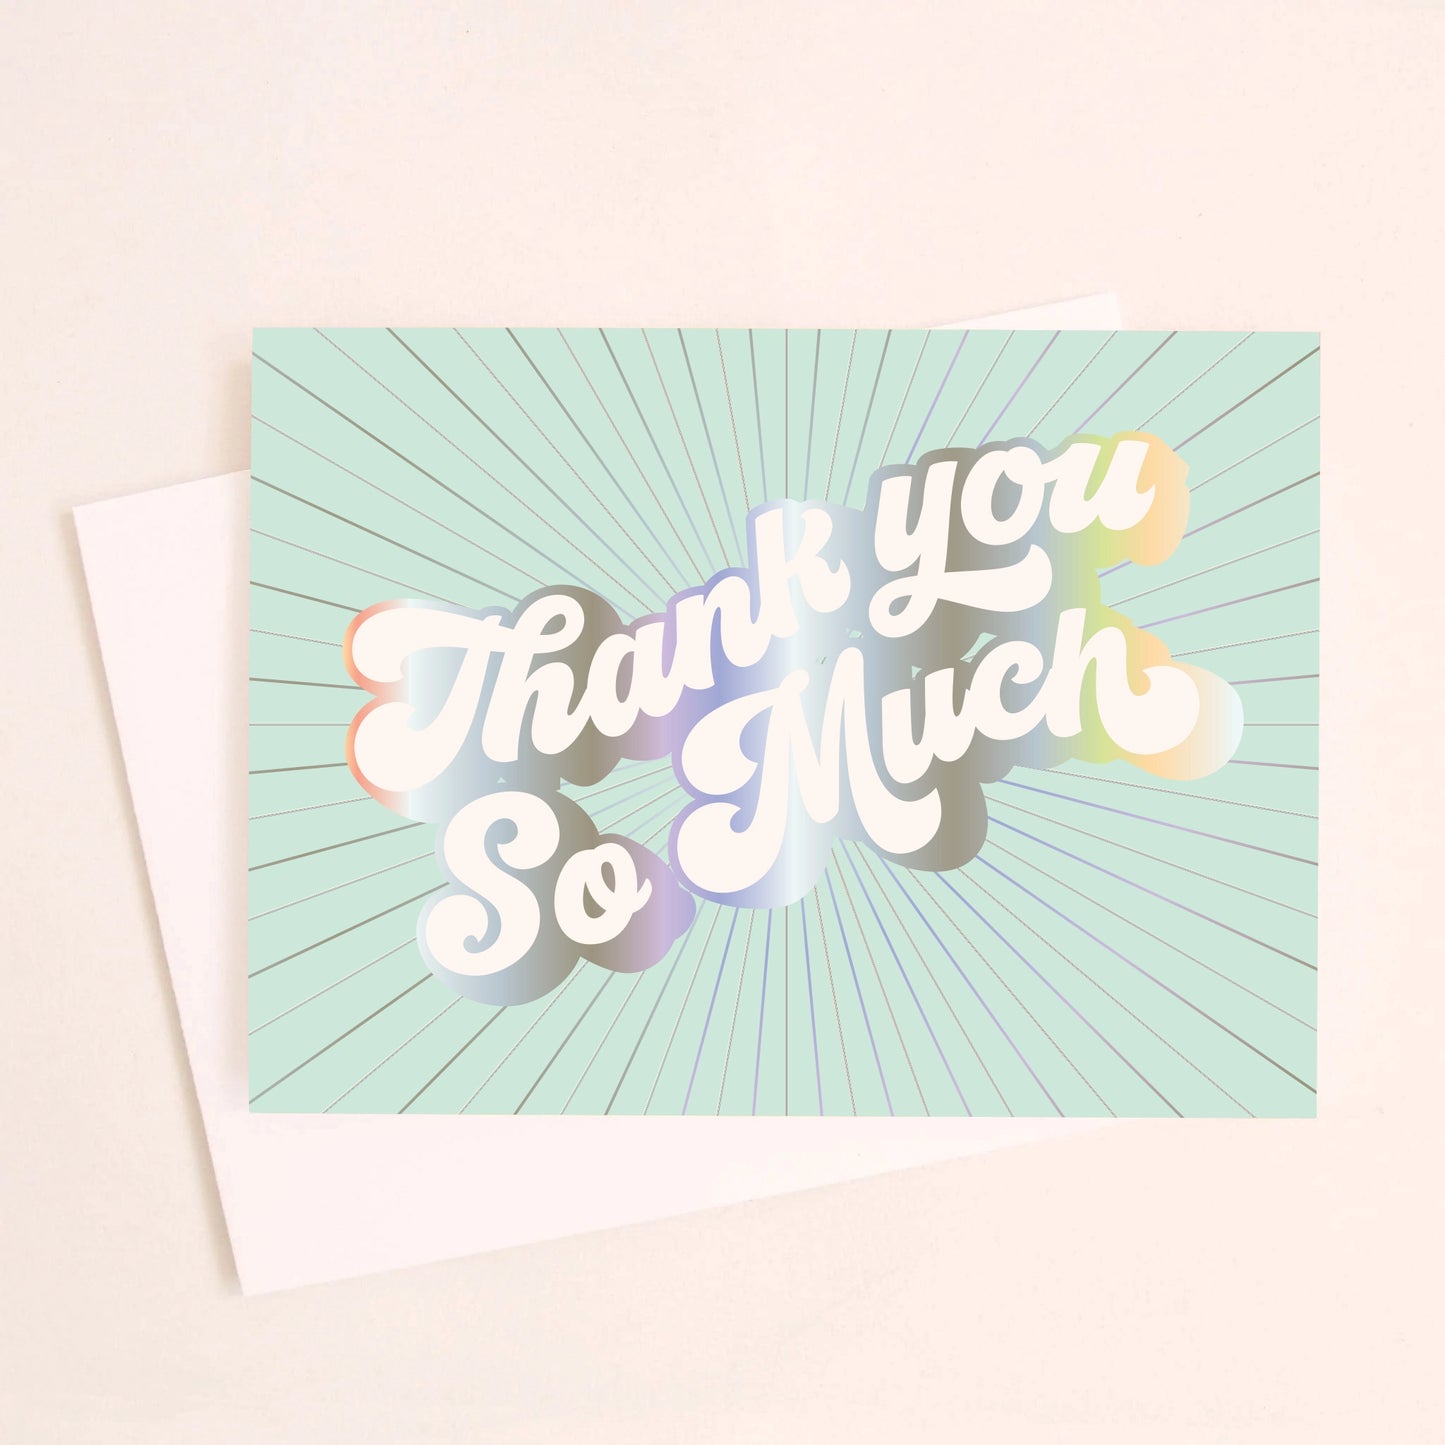 On an ivory background is a light teal greeting card with white, holographic outlined text that reads, "Thank You So Much". 